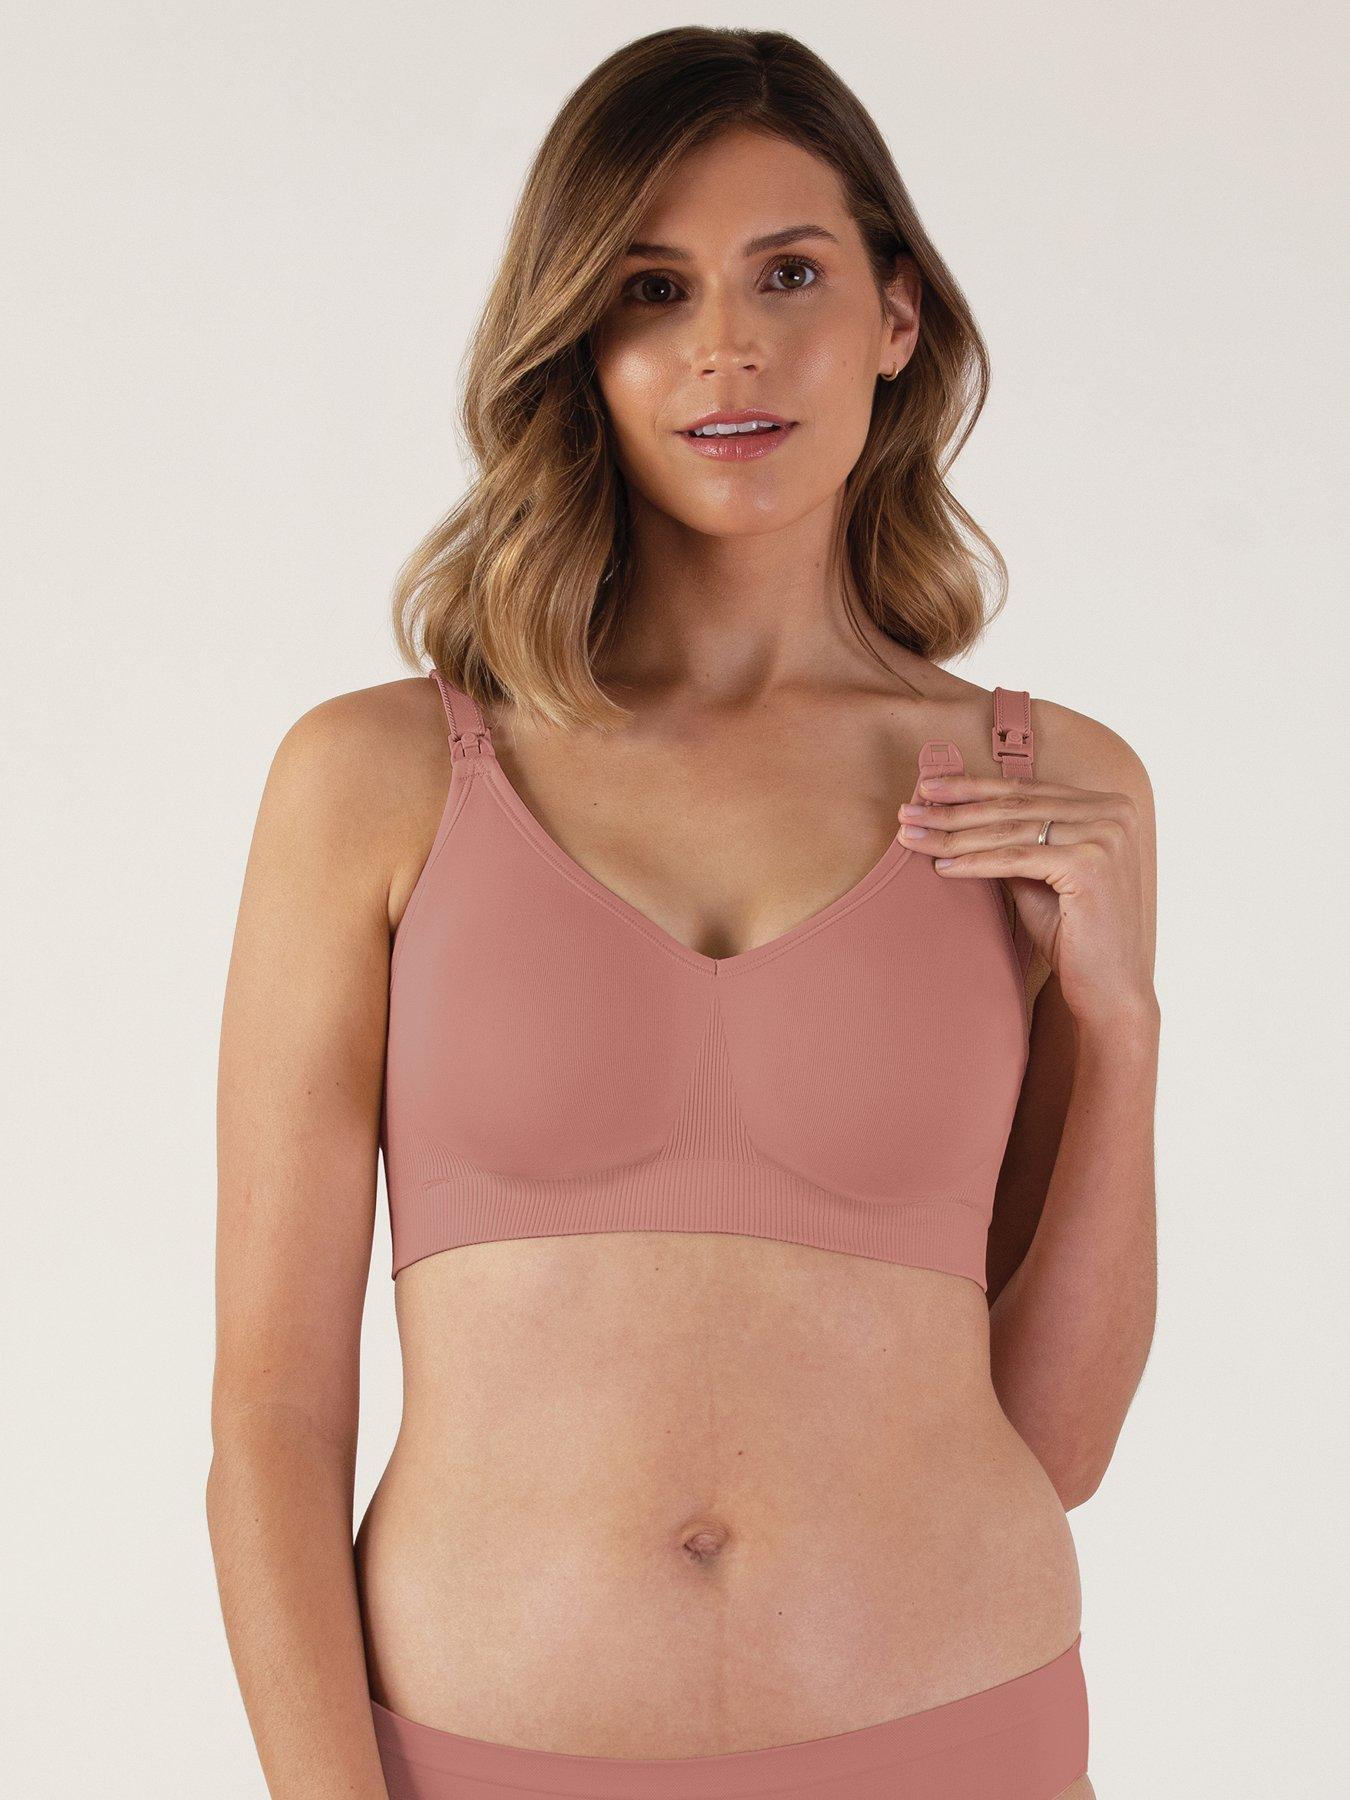 Small Size Figure Types in 32D Bra Size C Cup Sizes Pink Blush